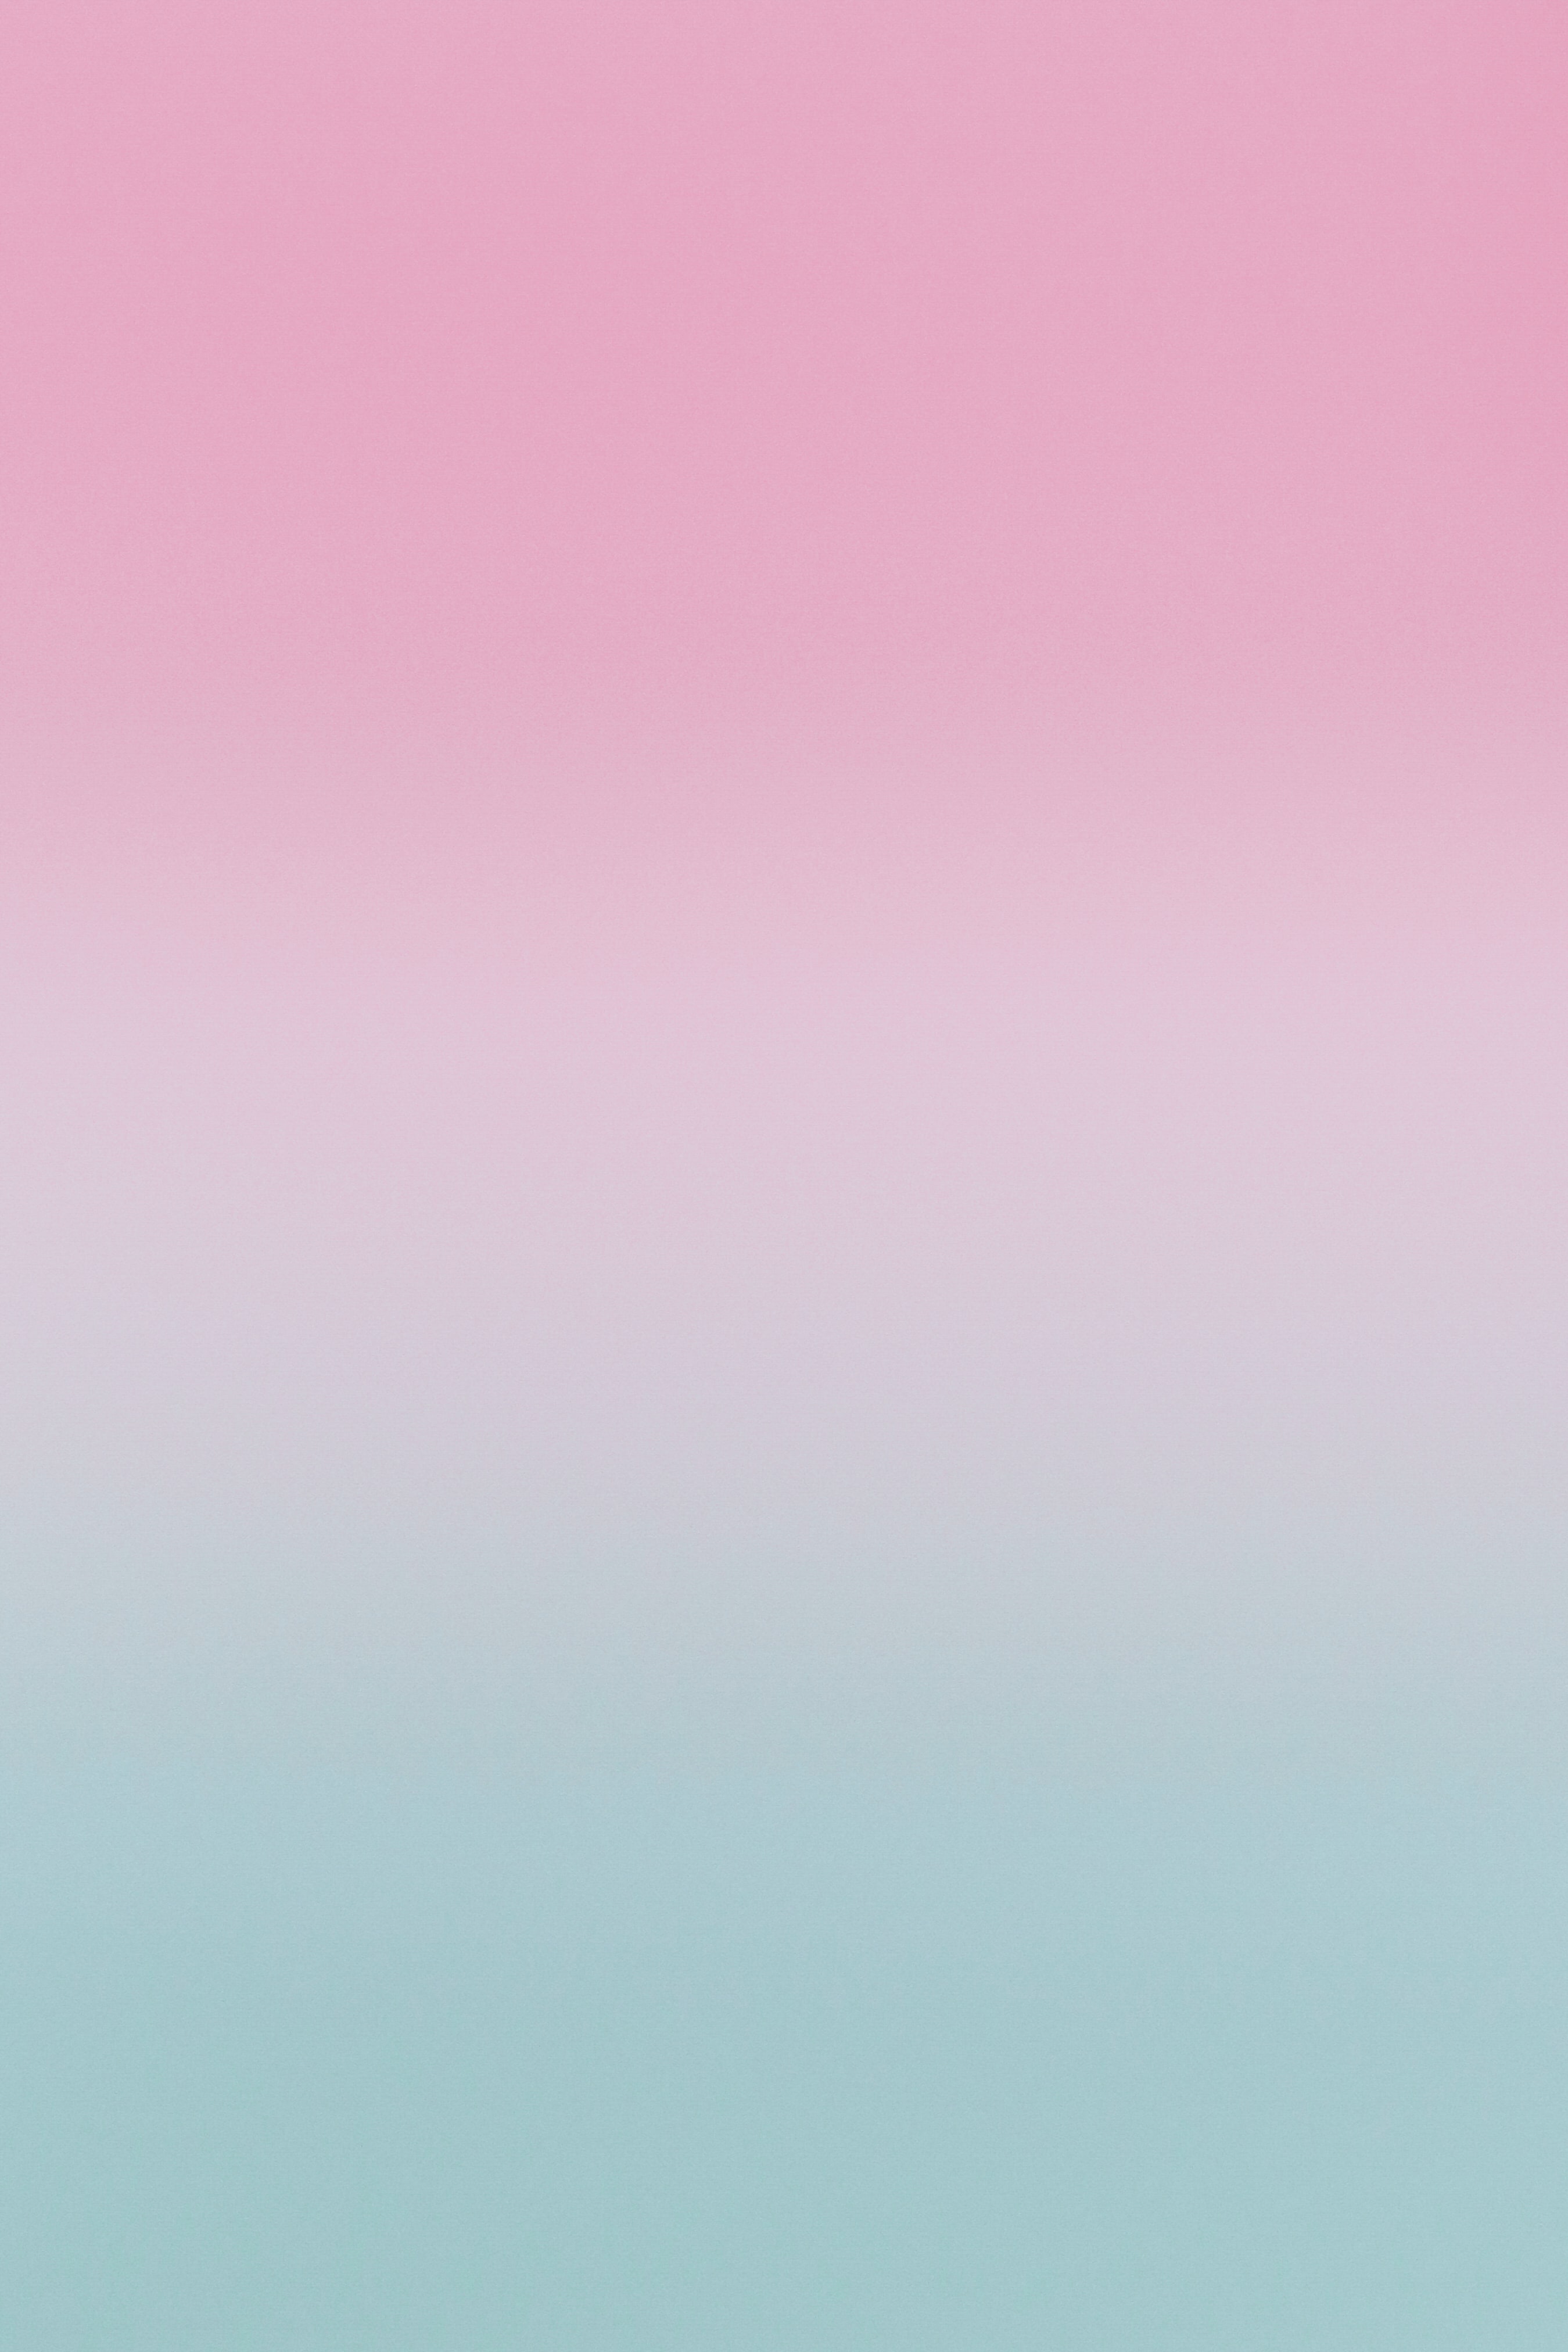 pink, gradient, blue, abstract, blur, smooth 5K